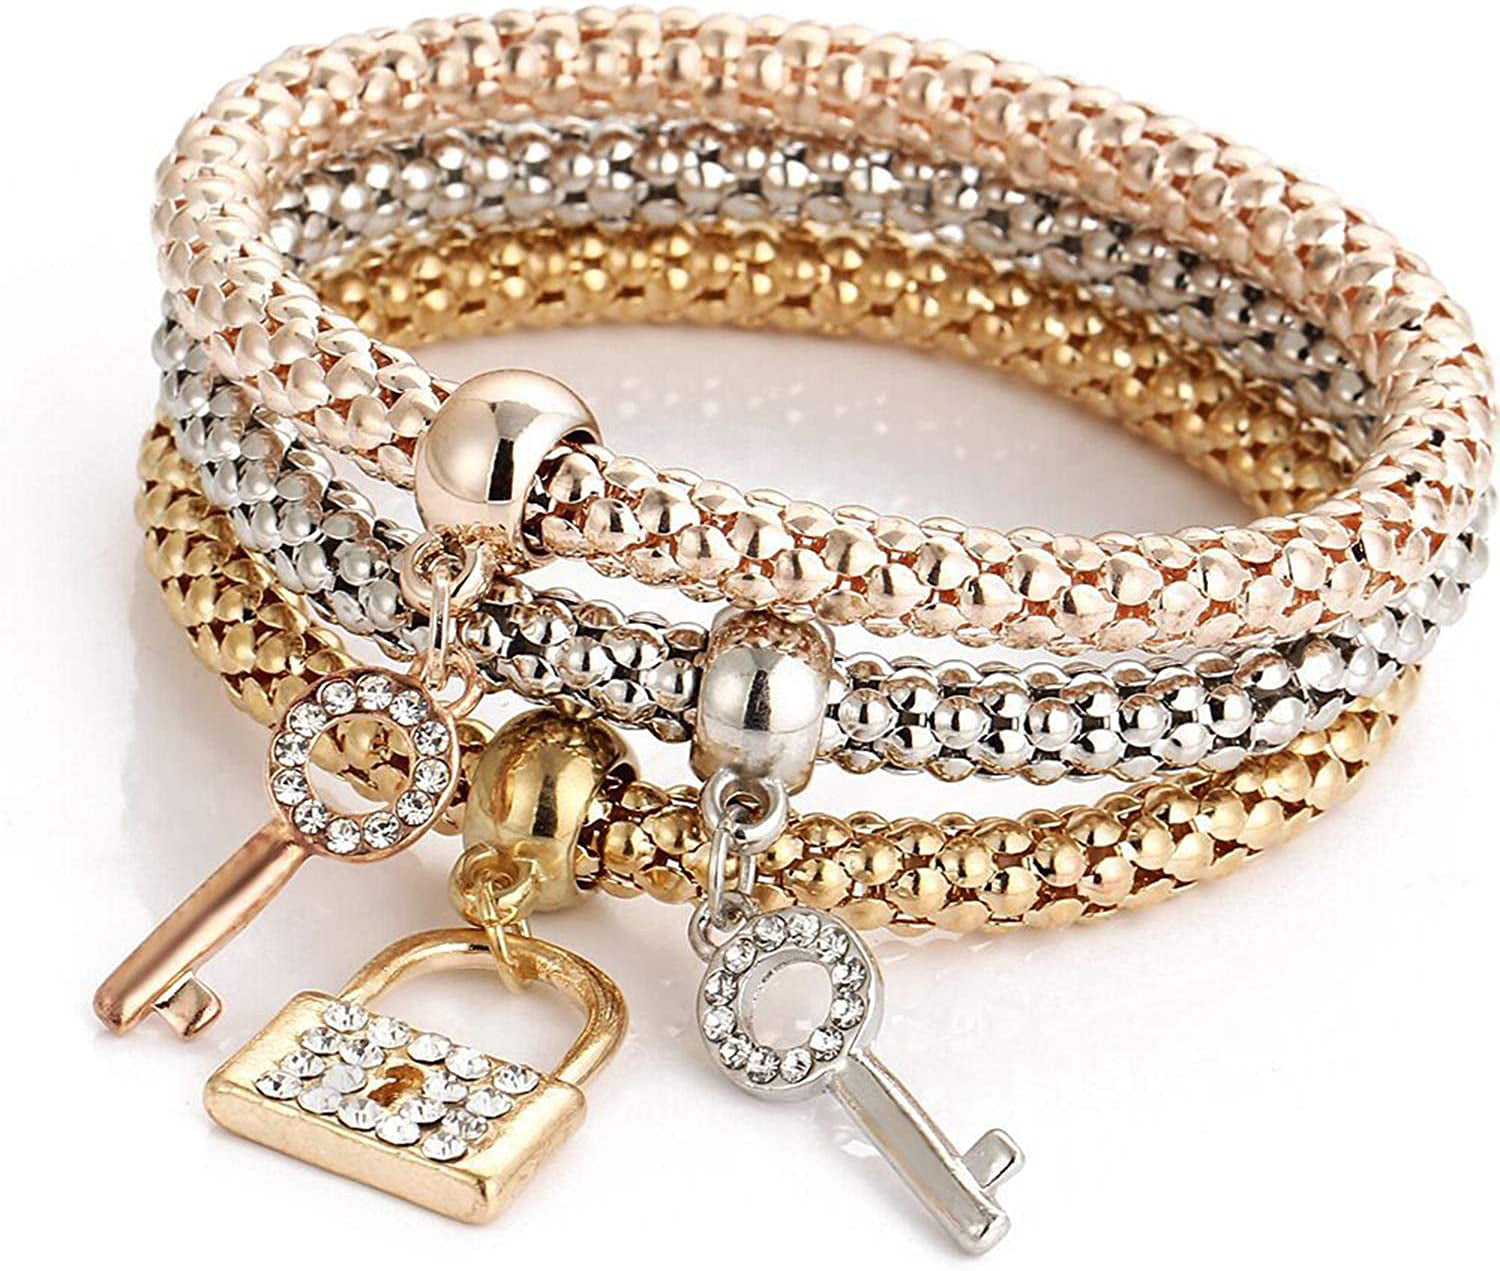 Rose Gold Plated Chain Bracelet Cubic Zirconia Corn Chain Bangles Crystal Bracelets Multilayer Charms Stretch Bracelet For Women Girls Teens Jewelry Gifts 